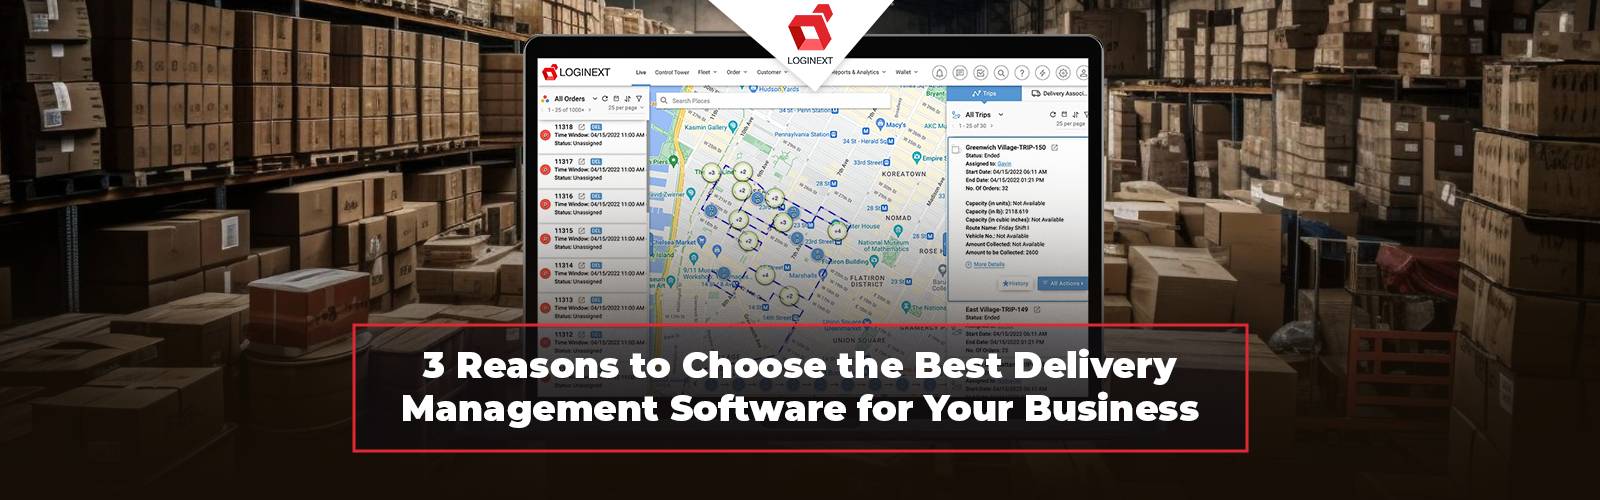 3 Reasons to Choose the Best Delivery Management Software for Your Business